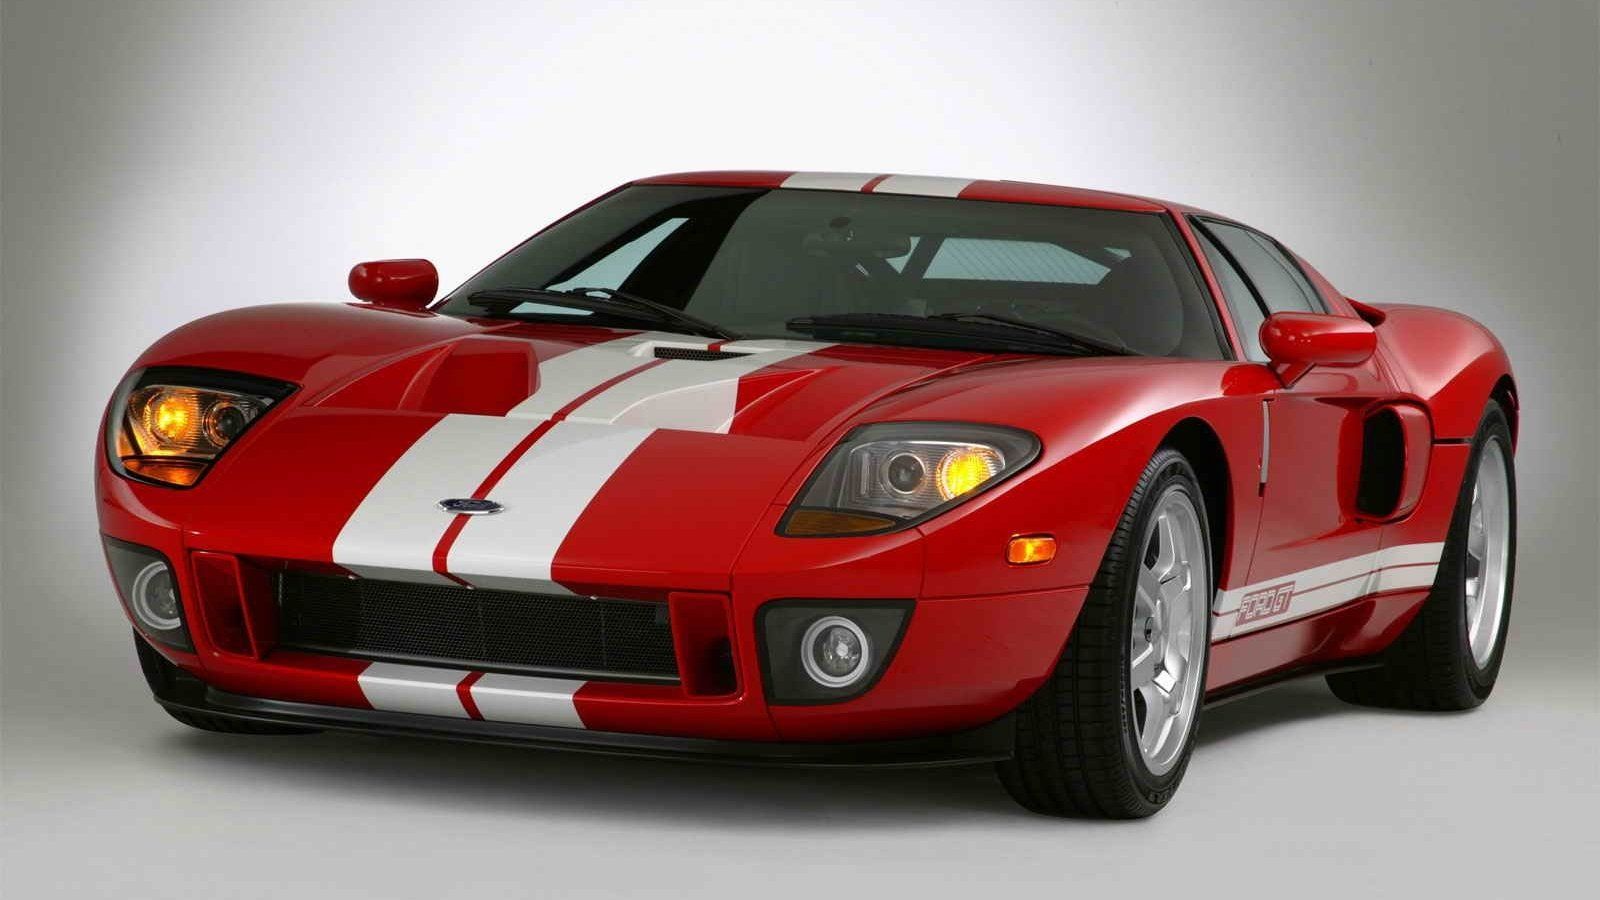 2006 Ford GT Picture, Photo, Wallpaper And Videos